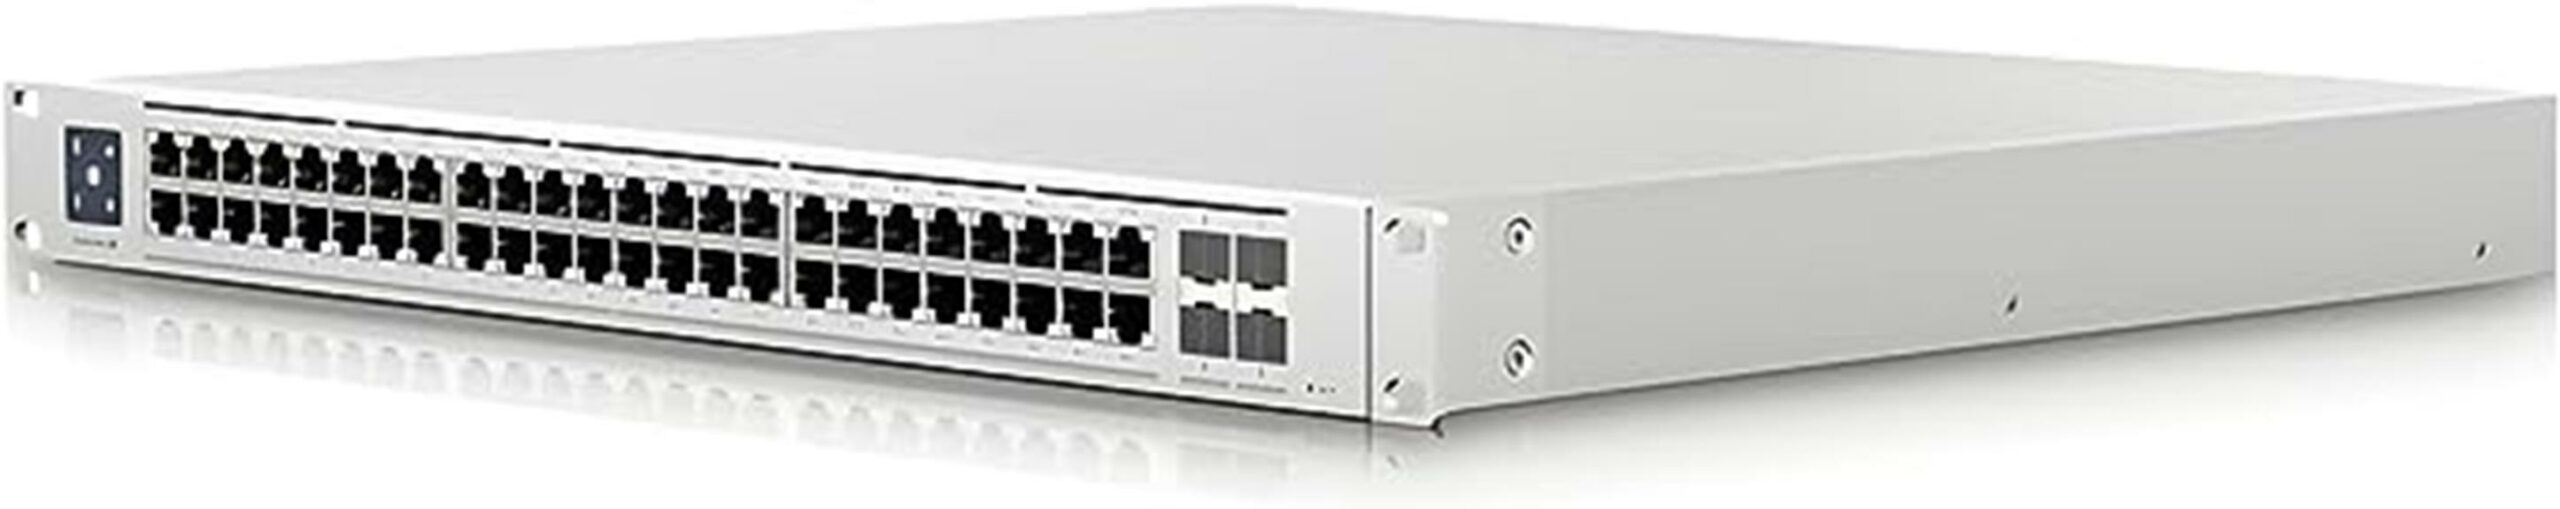 in depth review of ubiquiti switch enterprise 48 poe